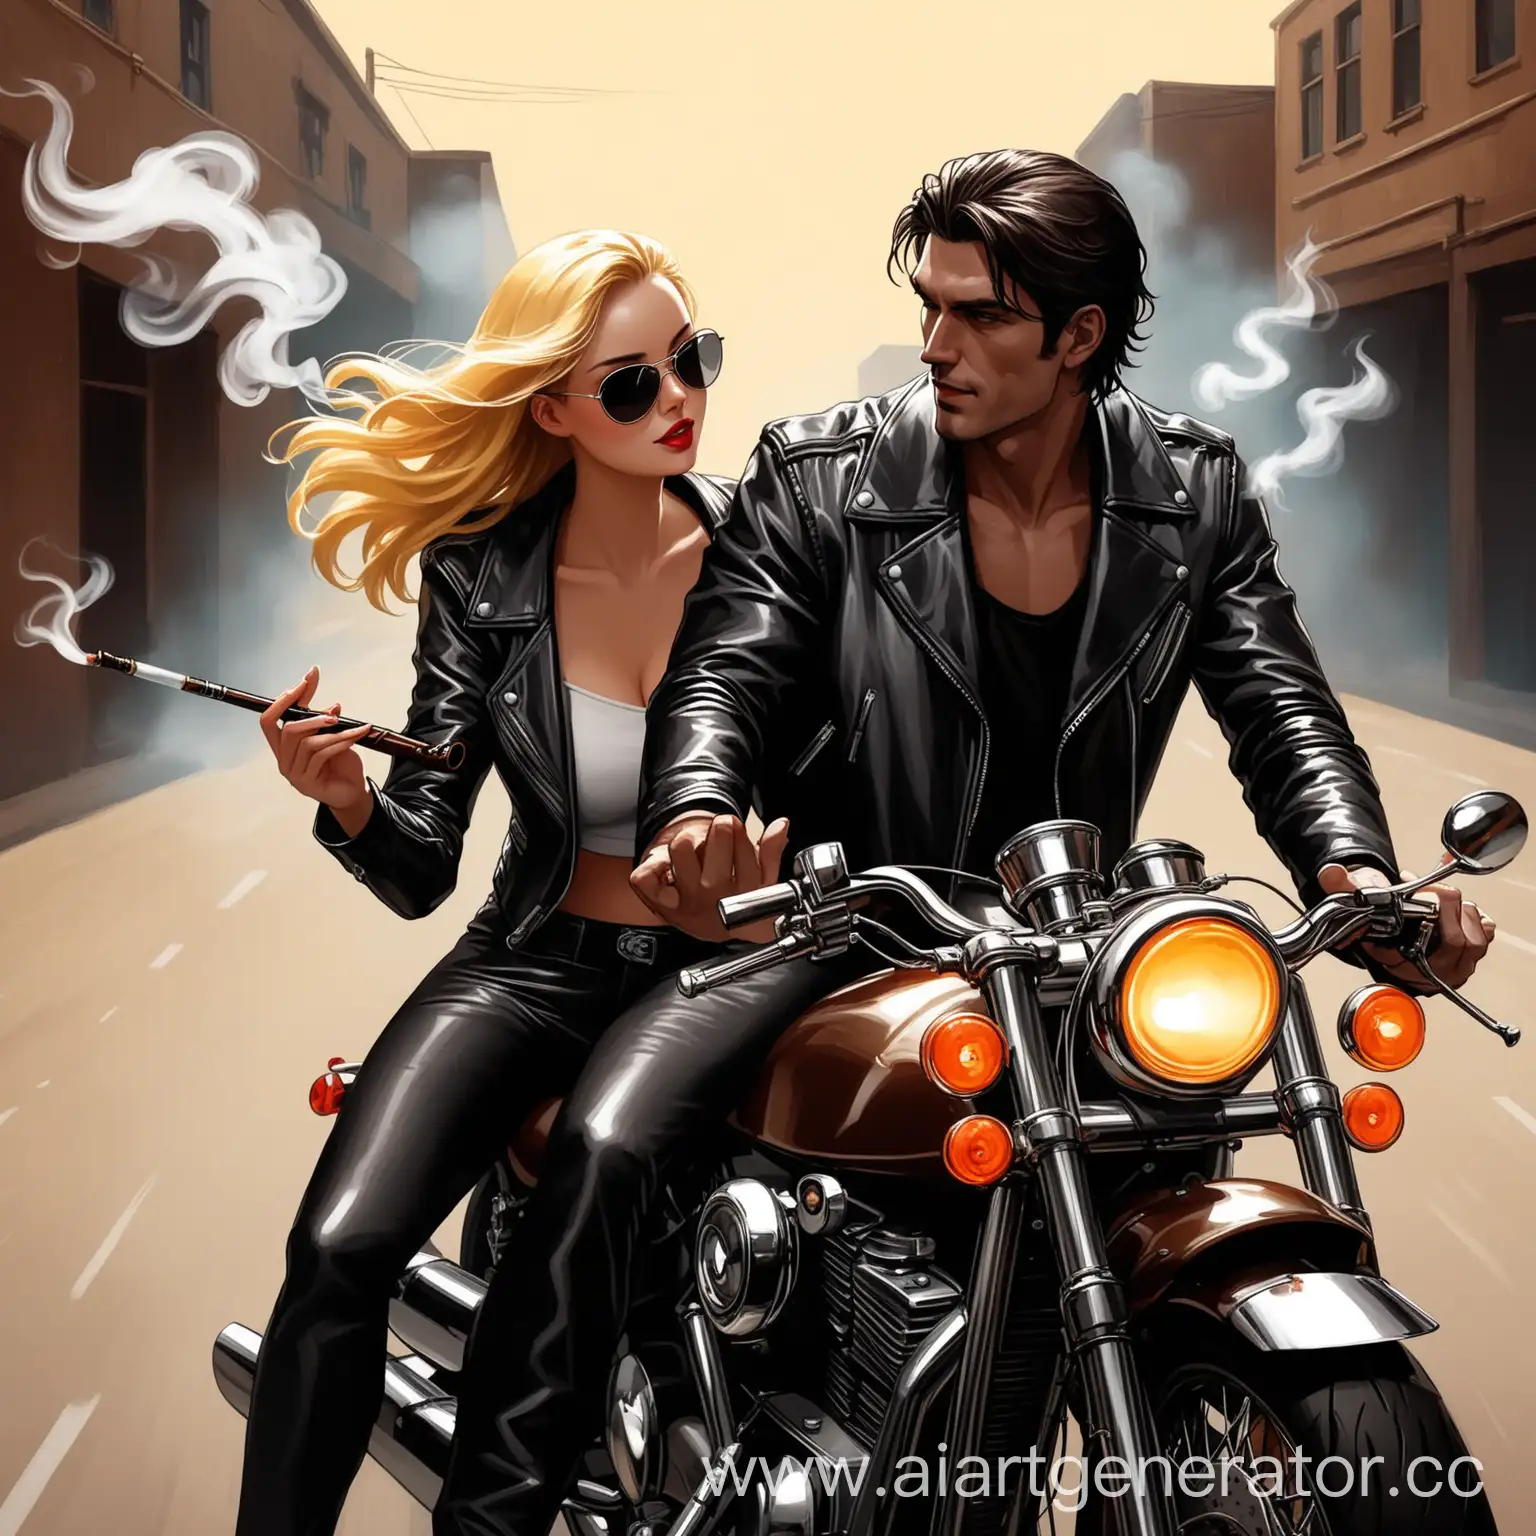 Man-and-Woman-Riding-Motorcycle-with-Smoking-Pipe